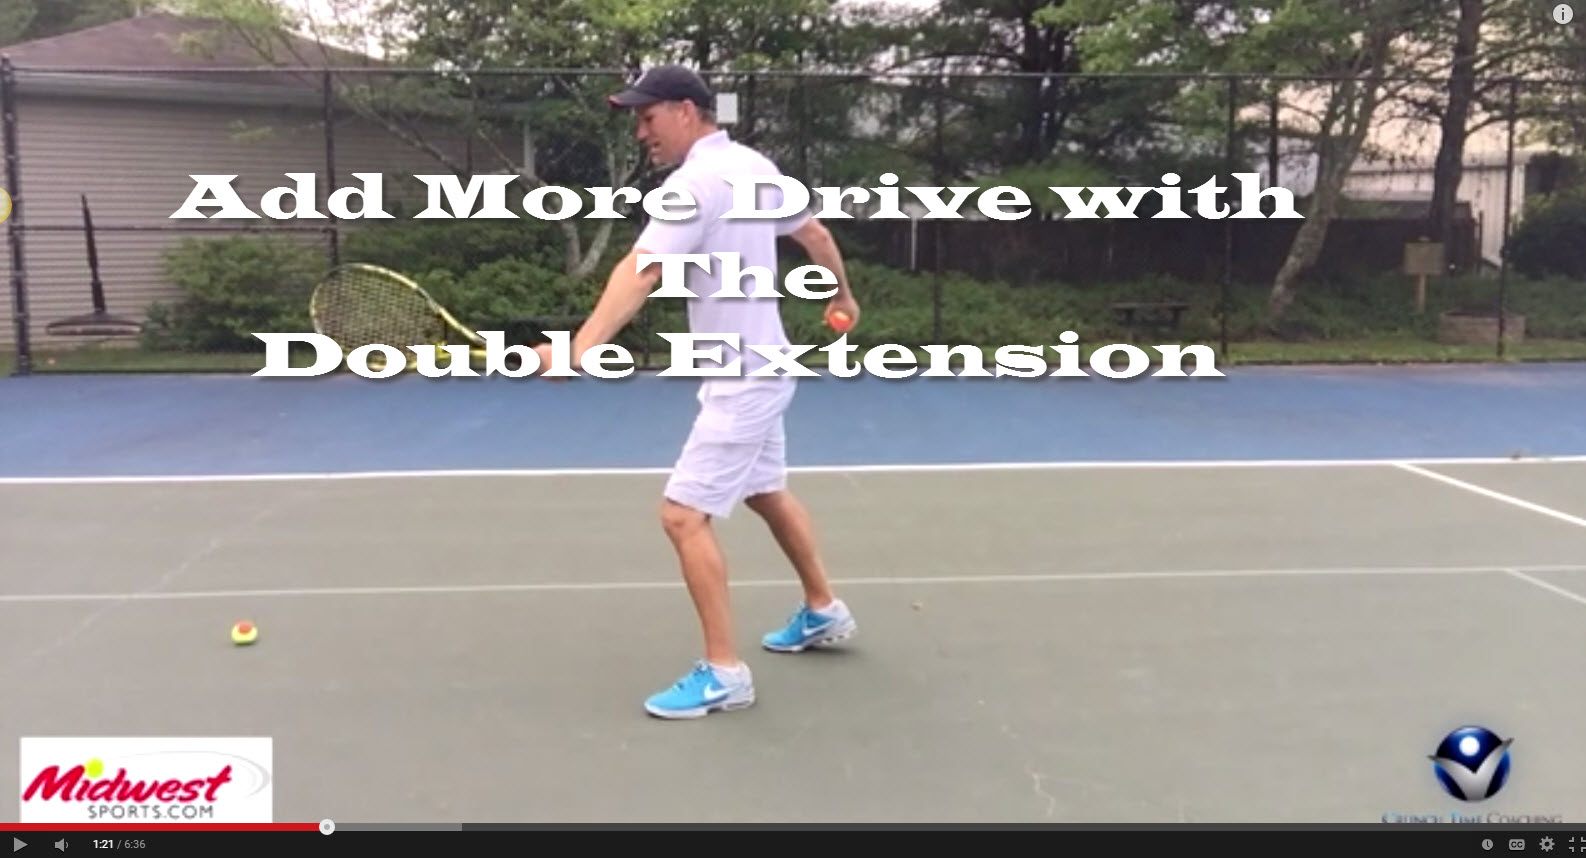 Backhand Tennis Lesson: How to Add more Drive to Your One Handed Backhand